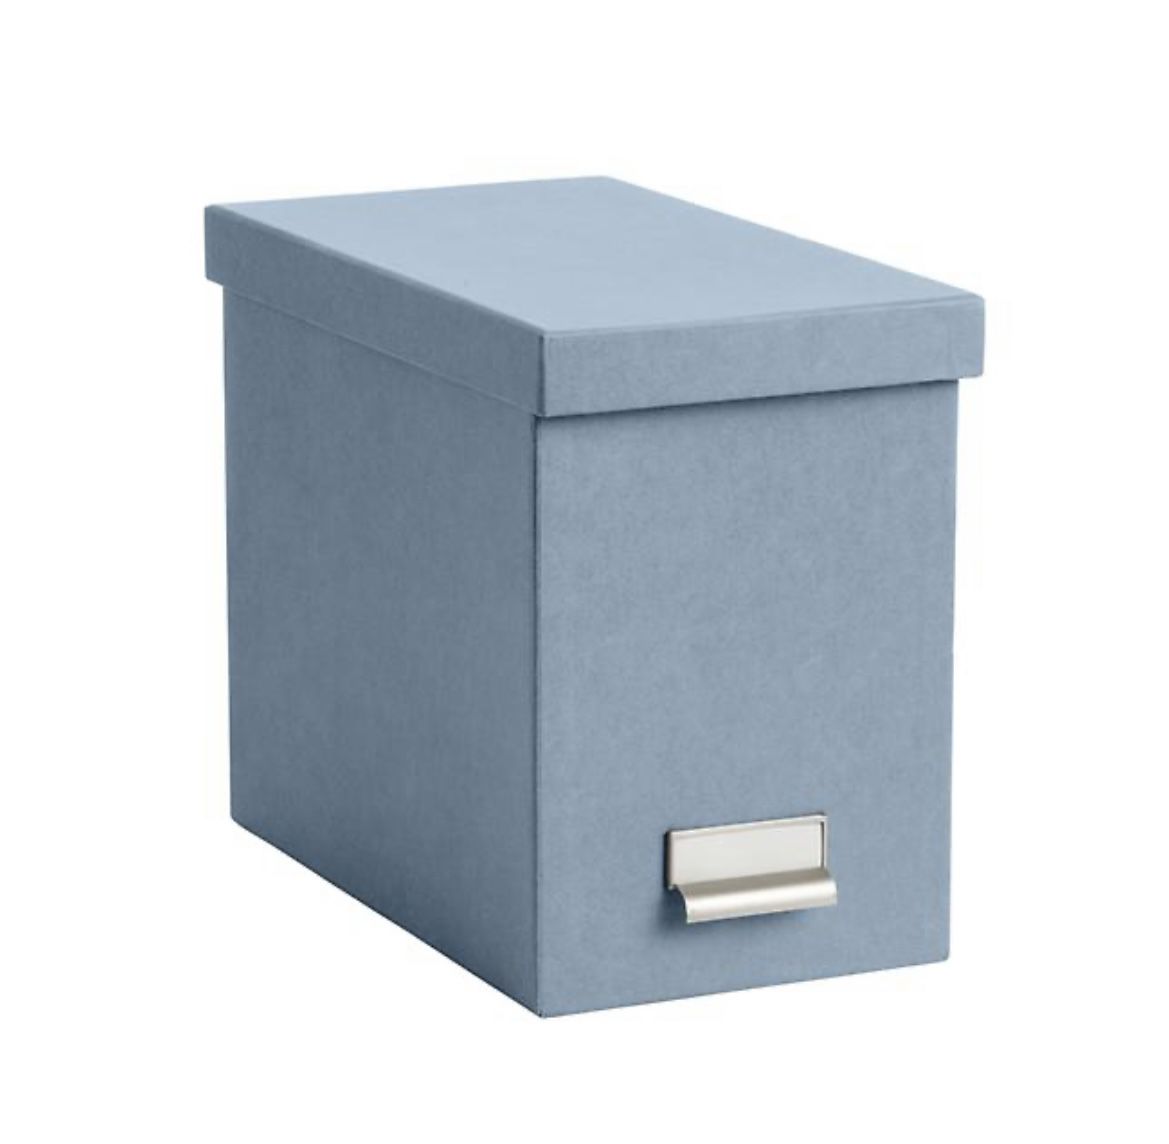 The Container Store: Steel blue, and Grey Desk Organizers (3)